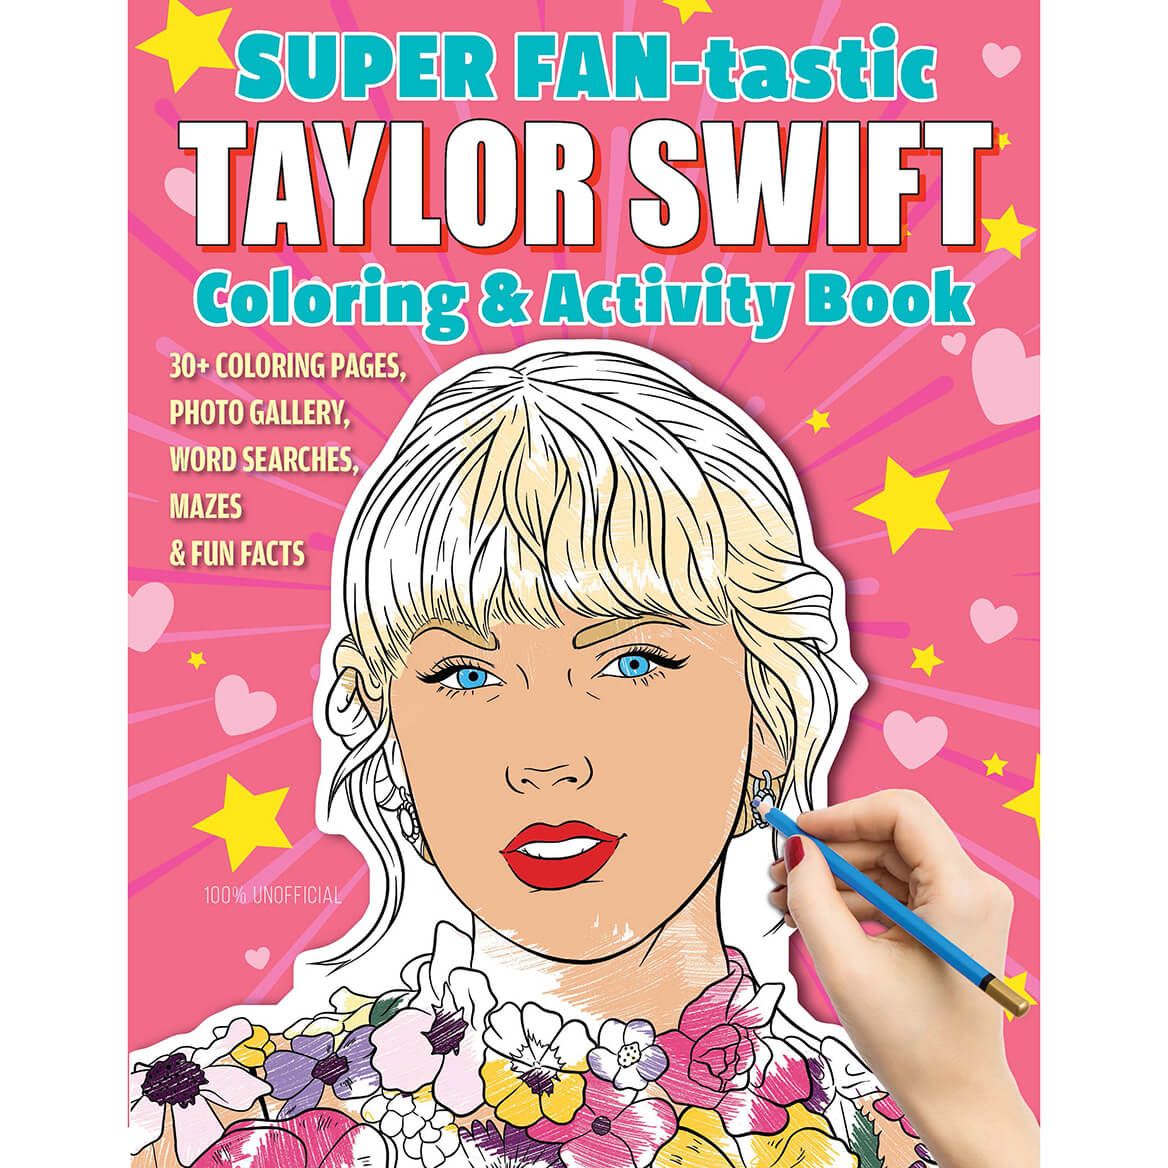 Taylor Swift Coloring and Activity Book + '-' + 377125